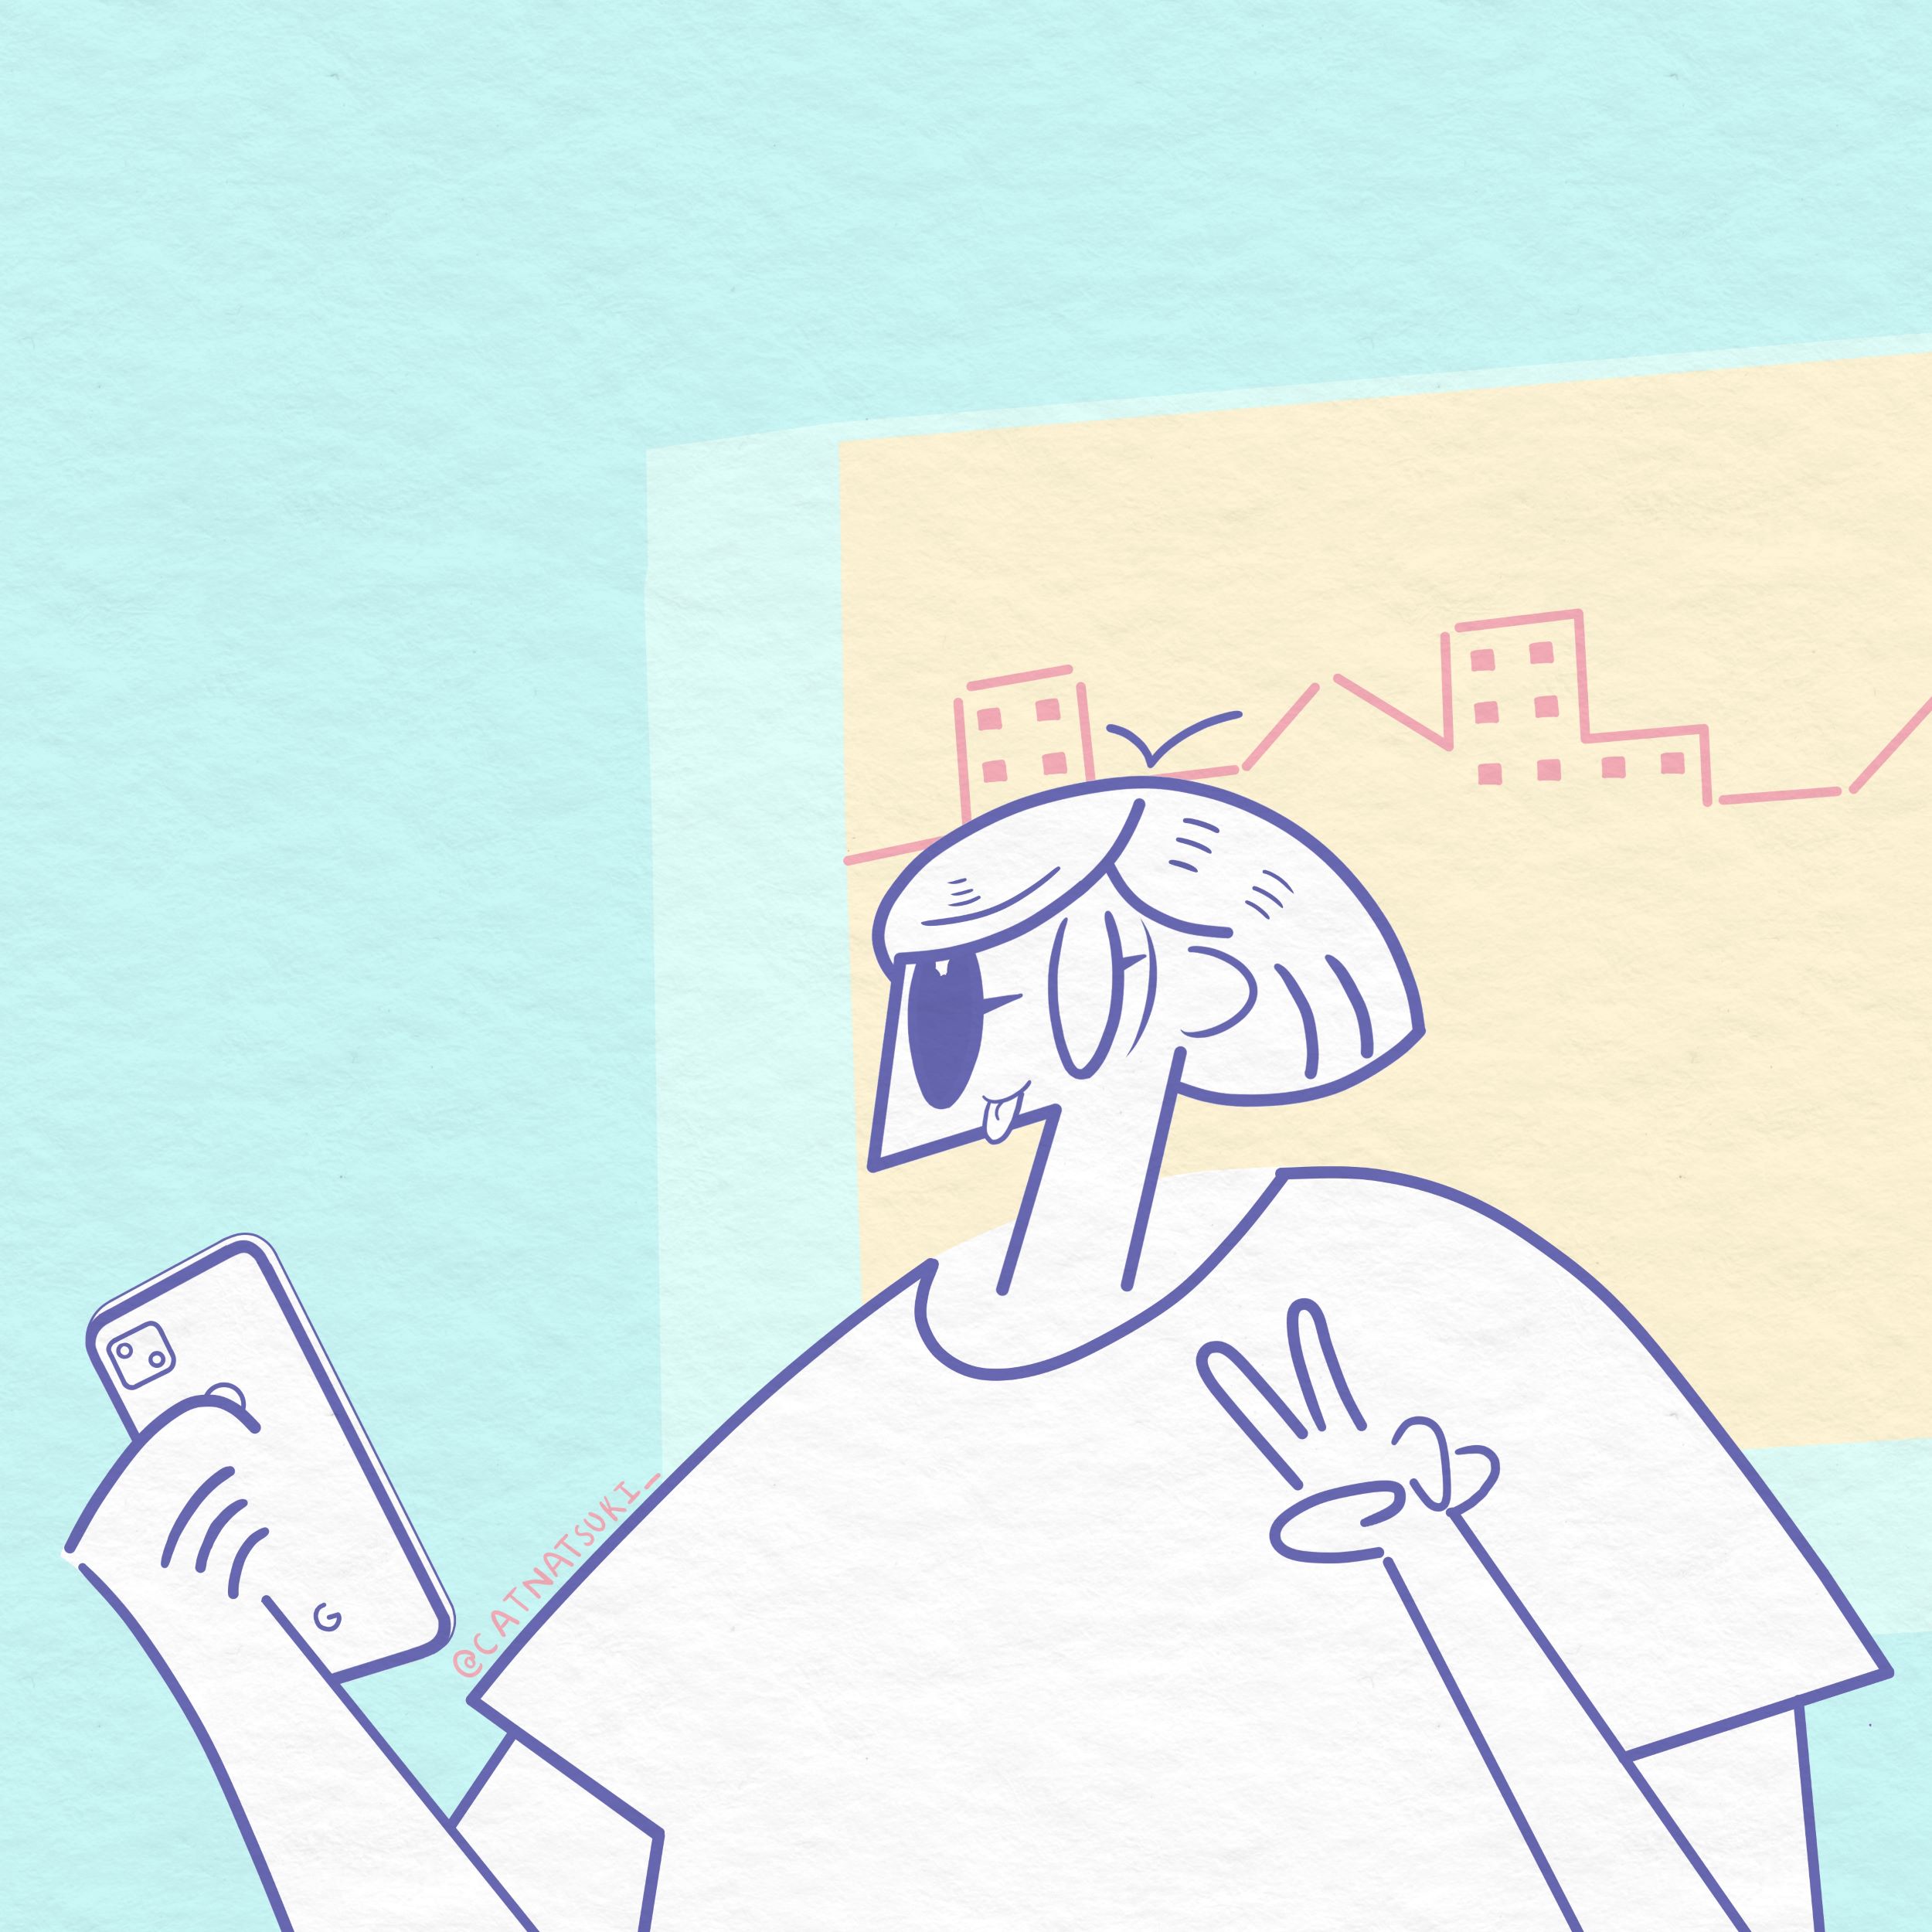 Illustration of a person taking a selfie.